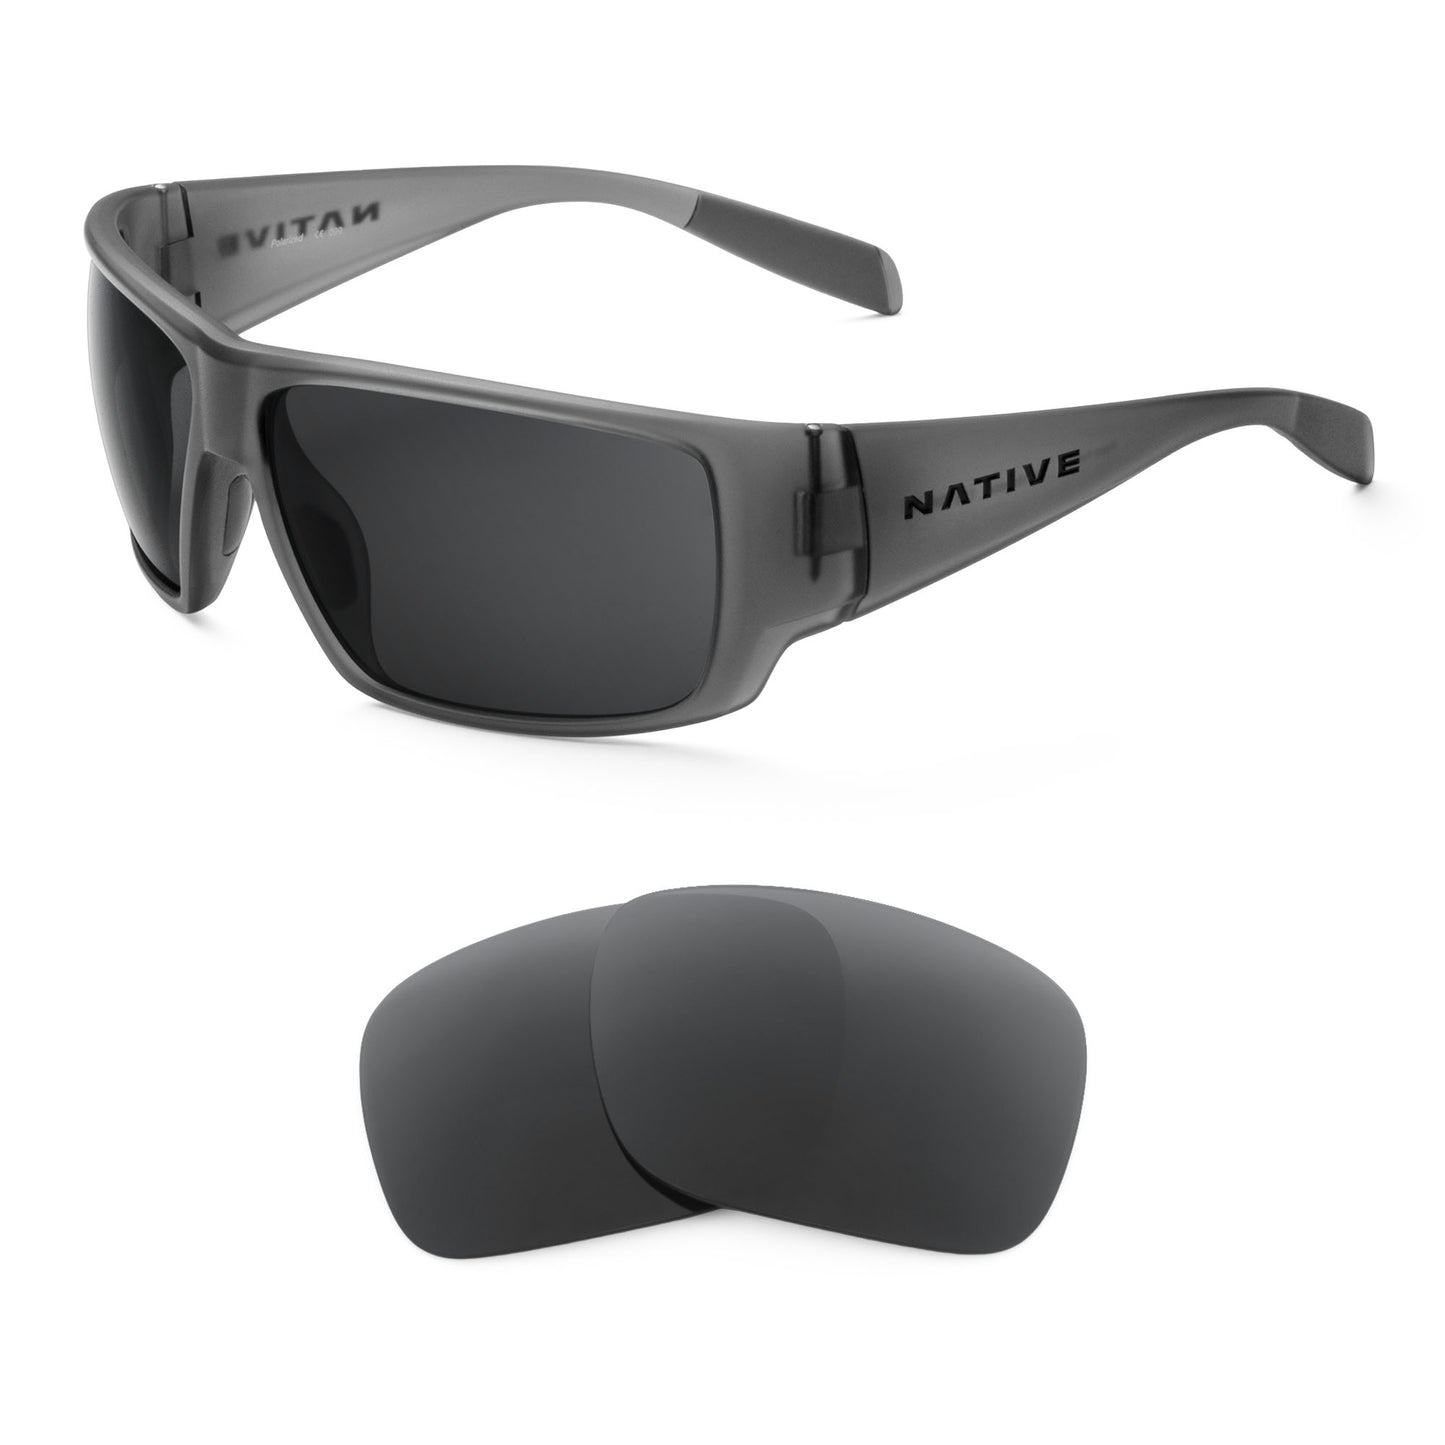 Native Sightcaster sunglasses with replacement lenses